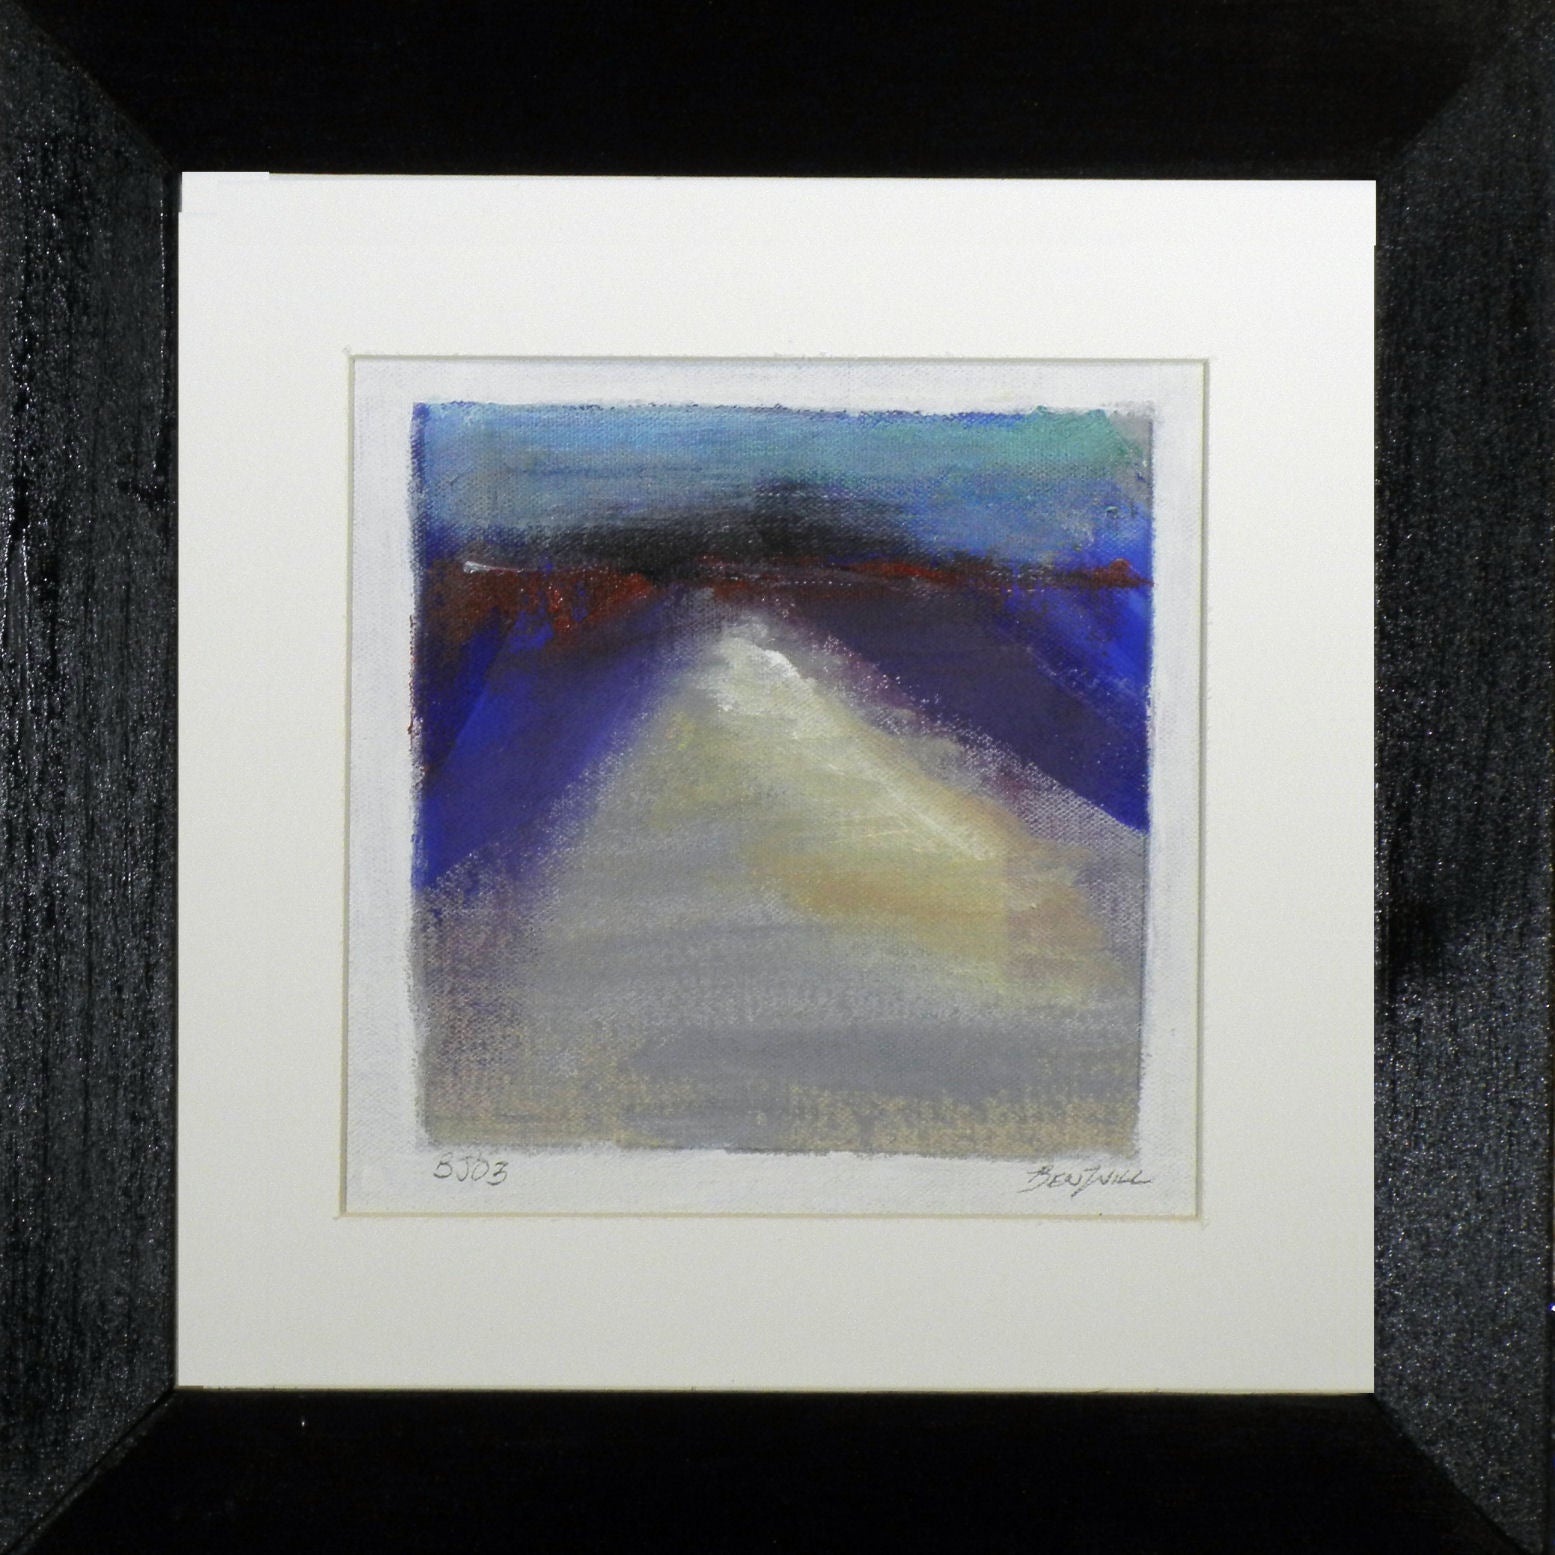 Framed Small Painting BJ03